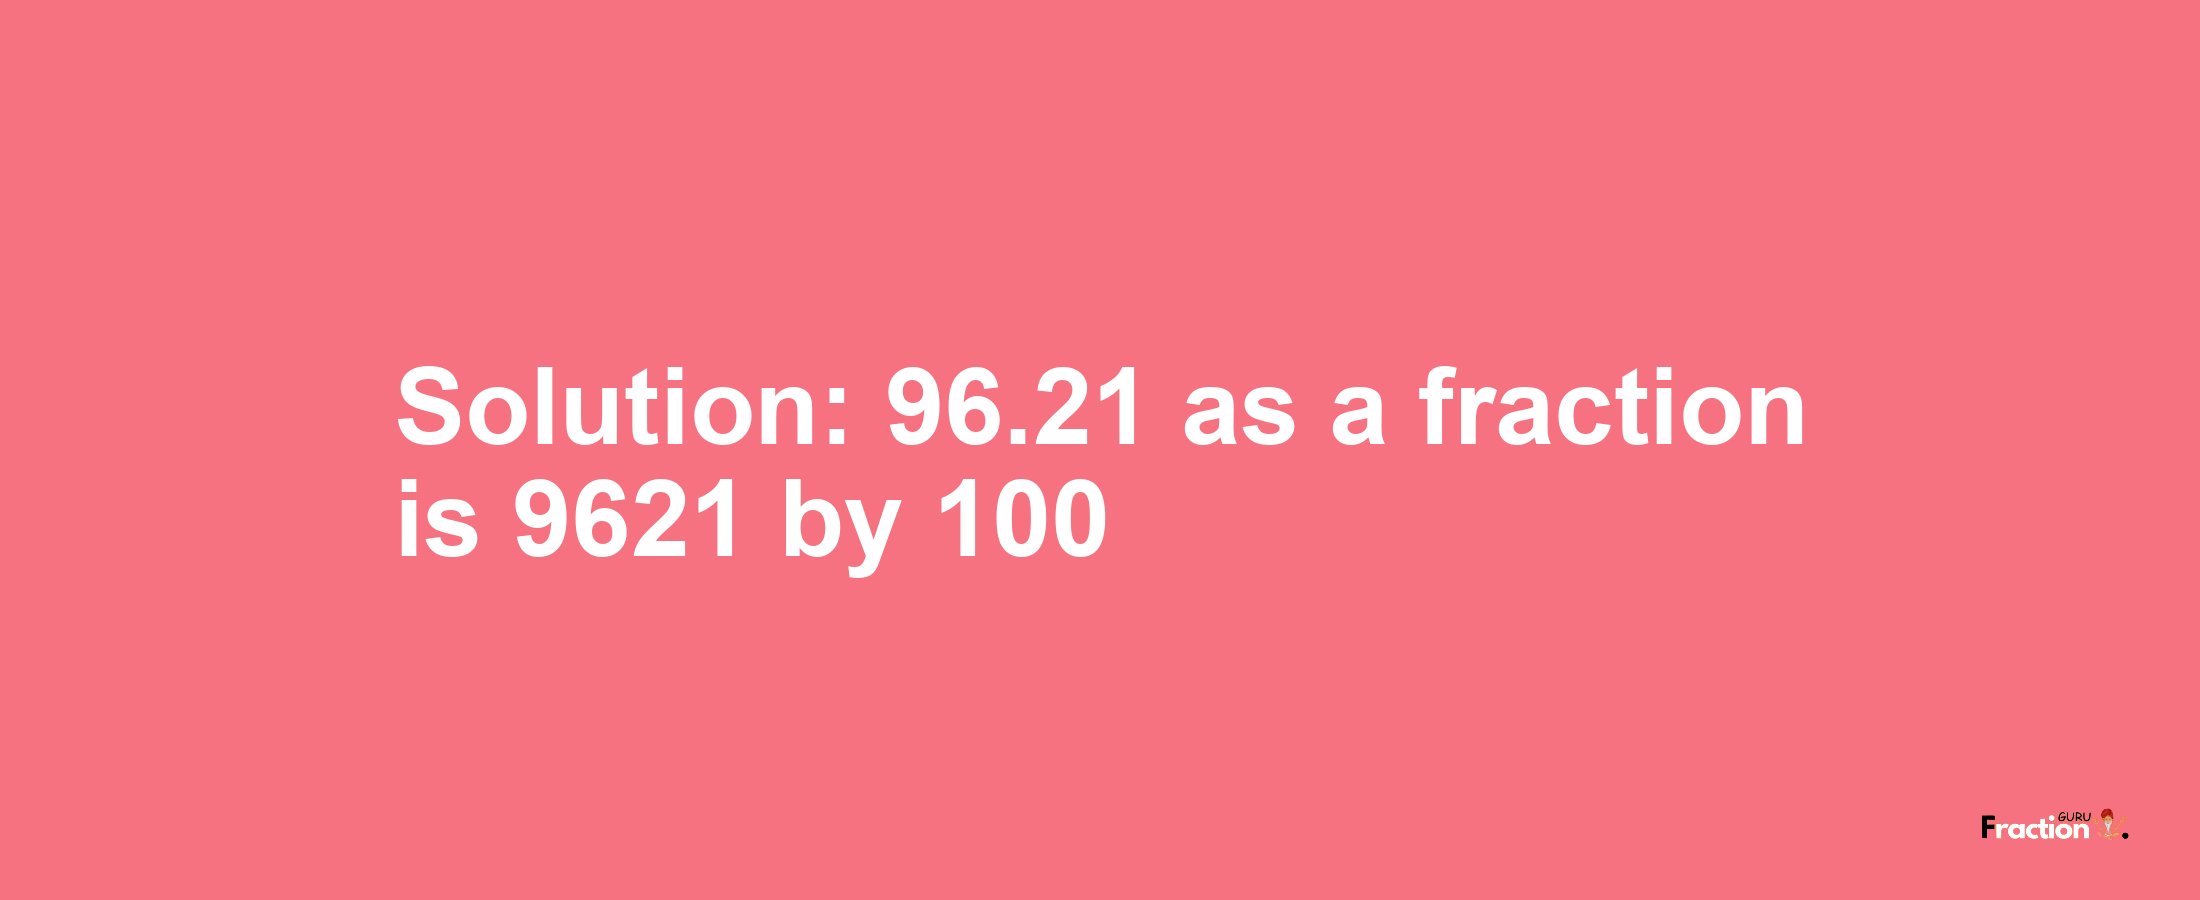 Solution:96.21 as a fraction is 9621/100